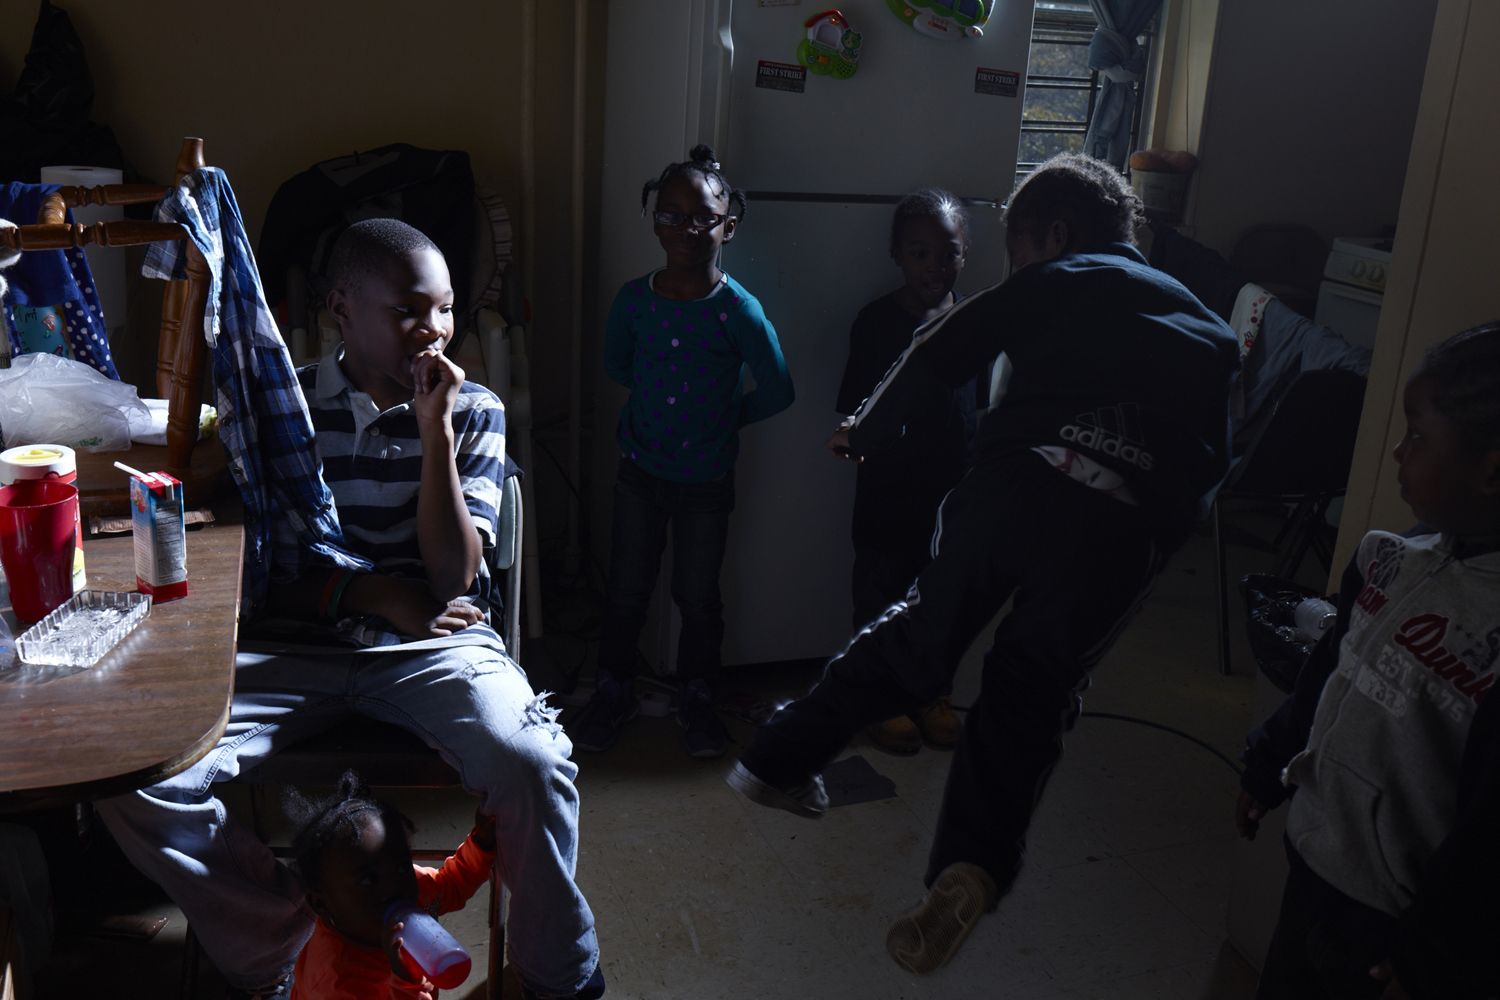 Image: Nov. 10, 2012. Kingsley Ihim, 12, Markeya Ihim, 15 mos., Jazzamia Ihim, 7, Martin Ihim, 4, and Shaun Ihim, 5, watch as Kebion, 6, practices his karate moves in the family’s 4th floor kitchen in the Redfern Houses of Rockaway, N.Y.